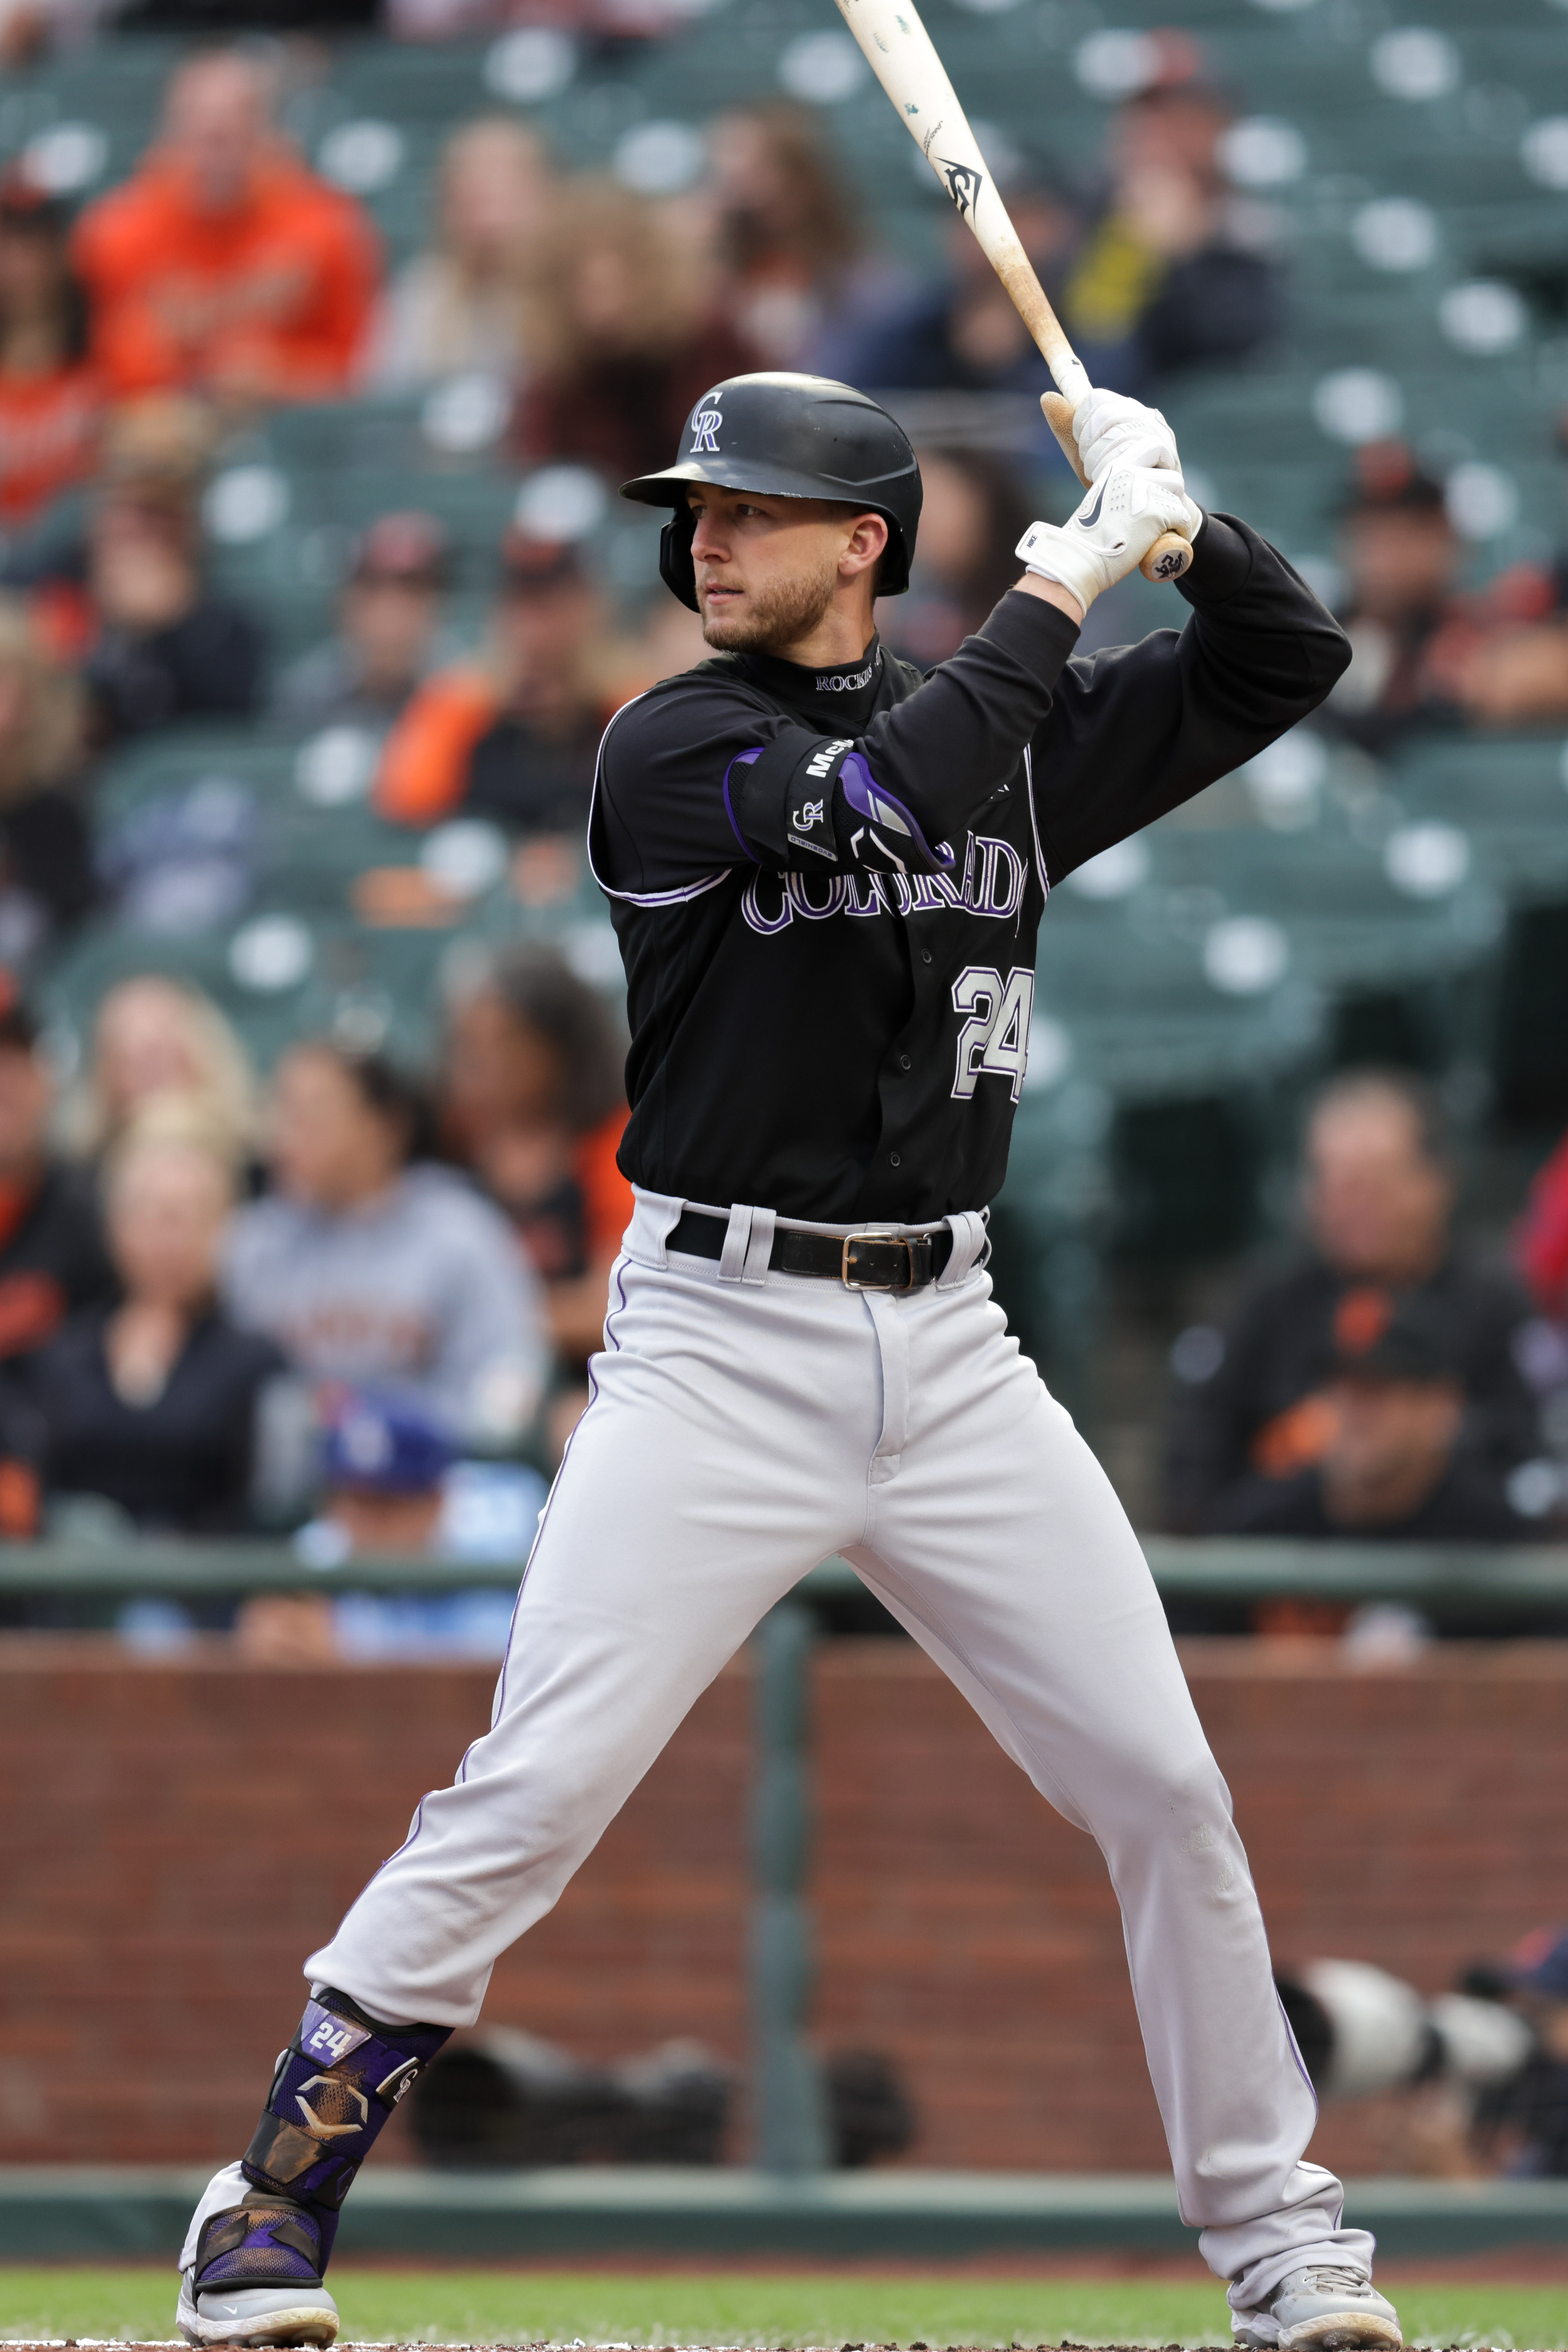 13th inning walk-off on a meaningless - Colorado Rockies